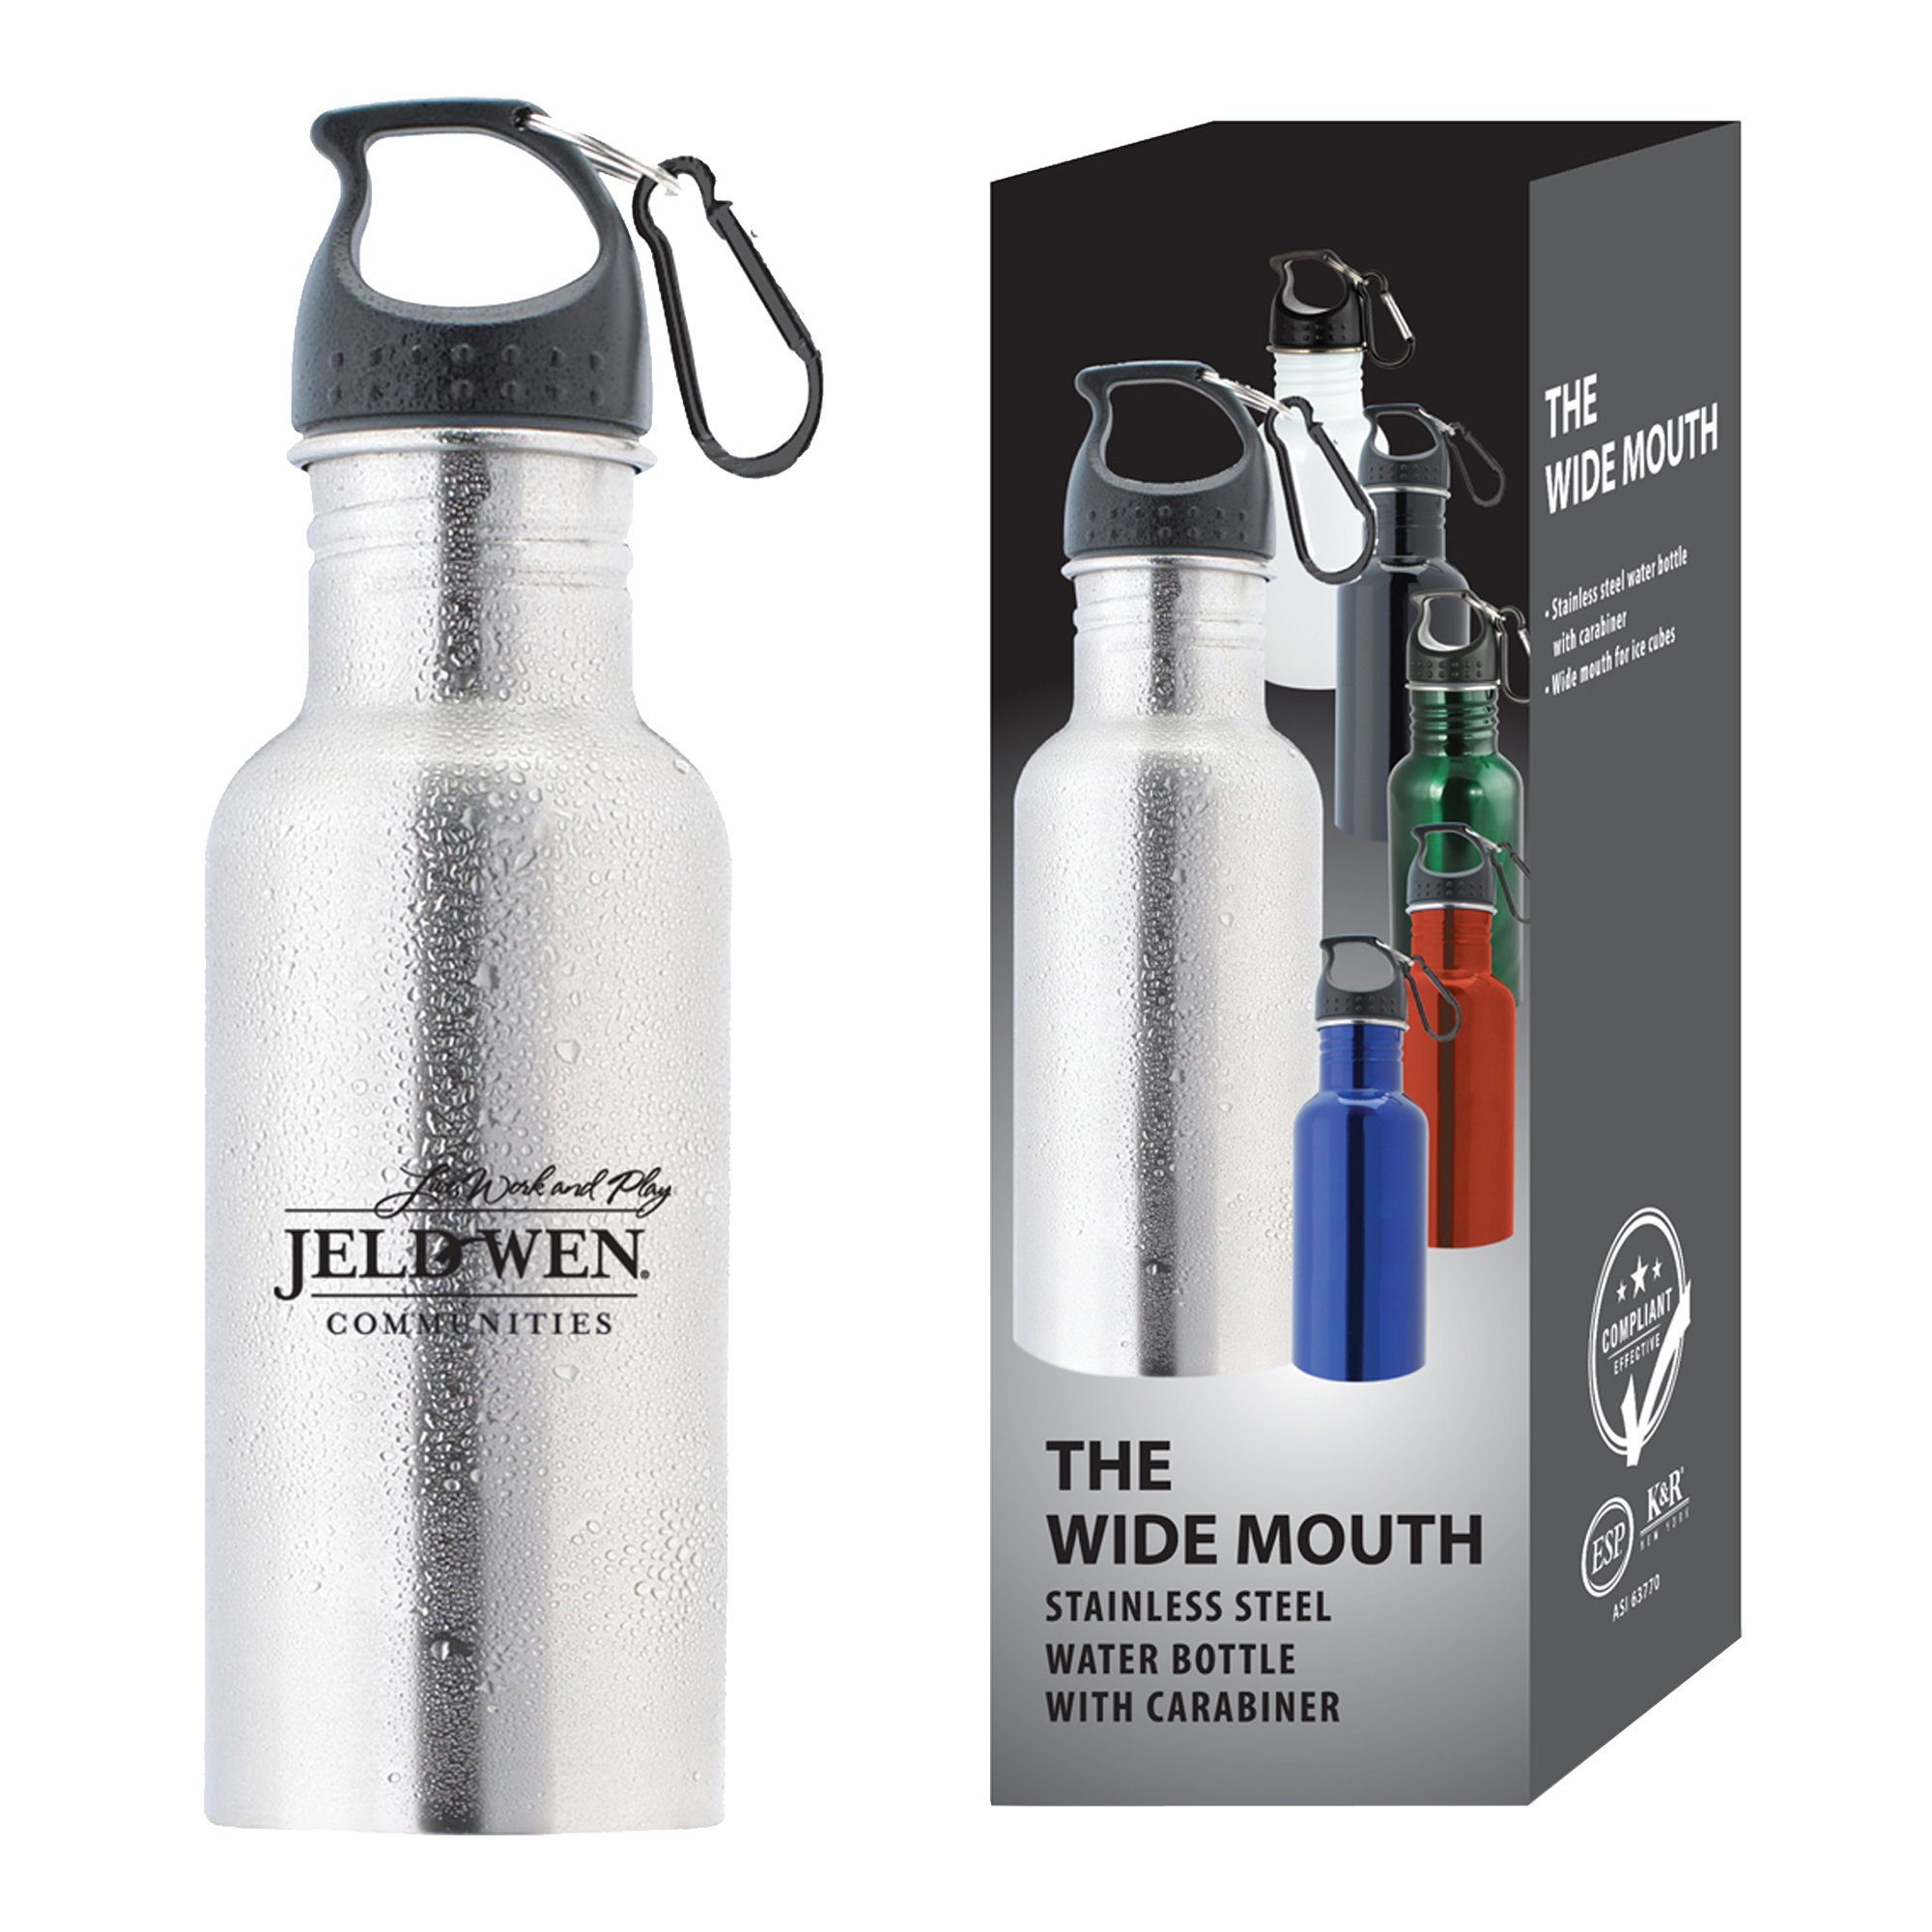 Double Walled Powder-Coated Sweat Proof Thermos - 3 Size and 8 Color Options Vacuum Insulated Carabiner Clip Day 1 Fitness Stainless Steel Water Bottle Standard Mouth 16 oz, 24 oz, or 32 oz 